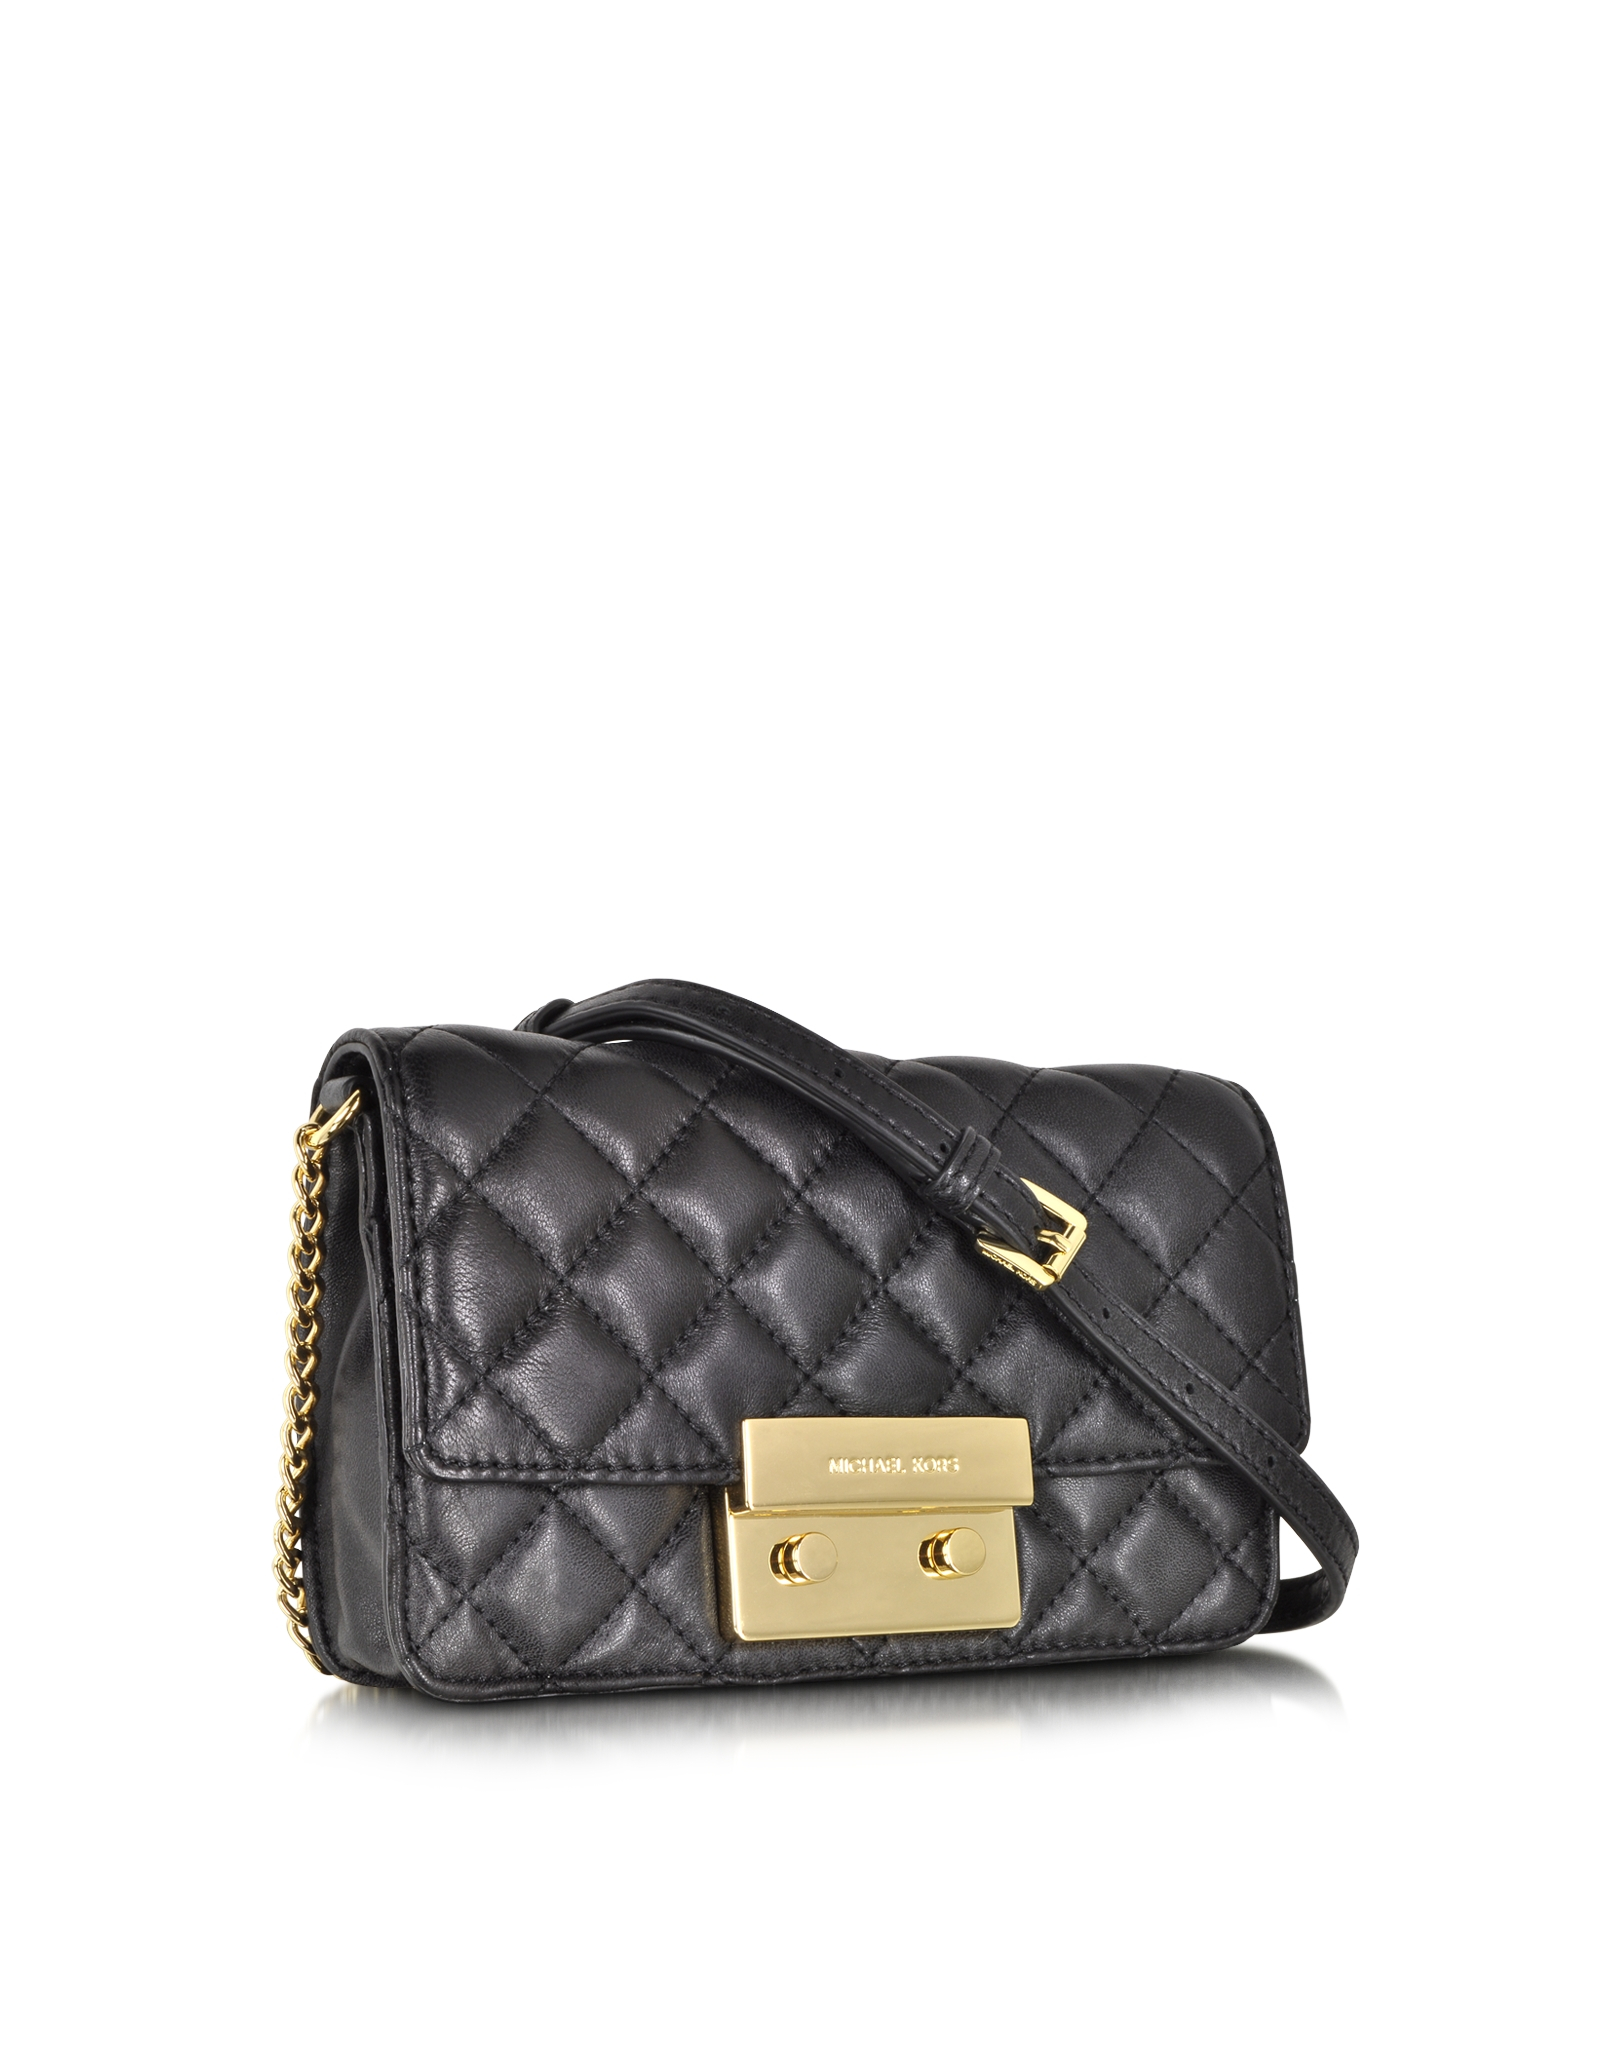 Michael Kors Sloan Black Quilted Leather Chain Crossbody Bag - Lyst